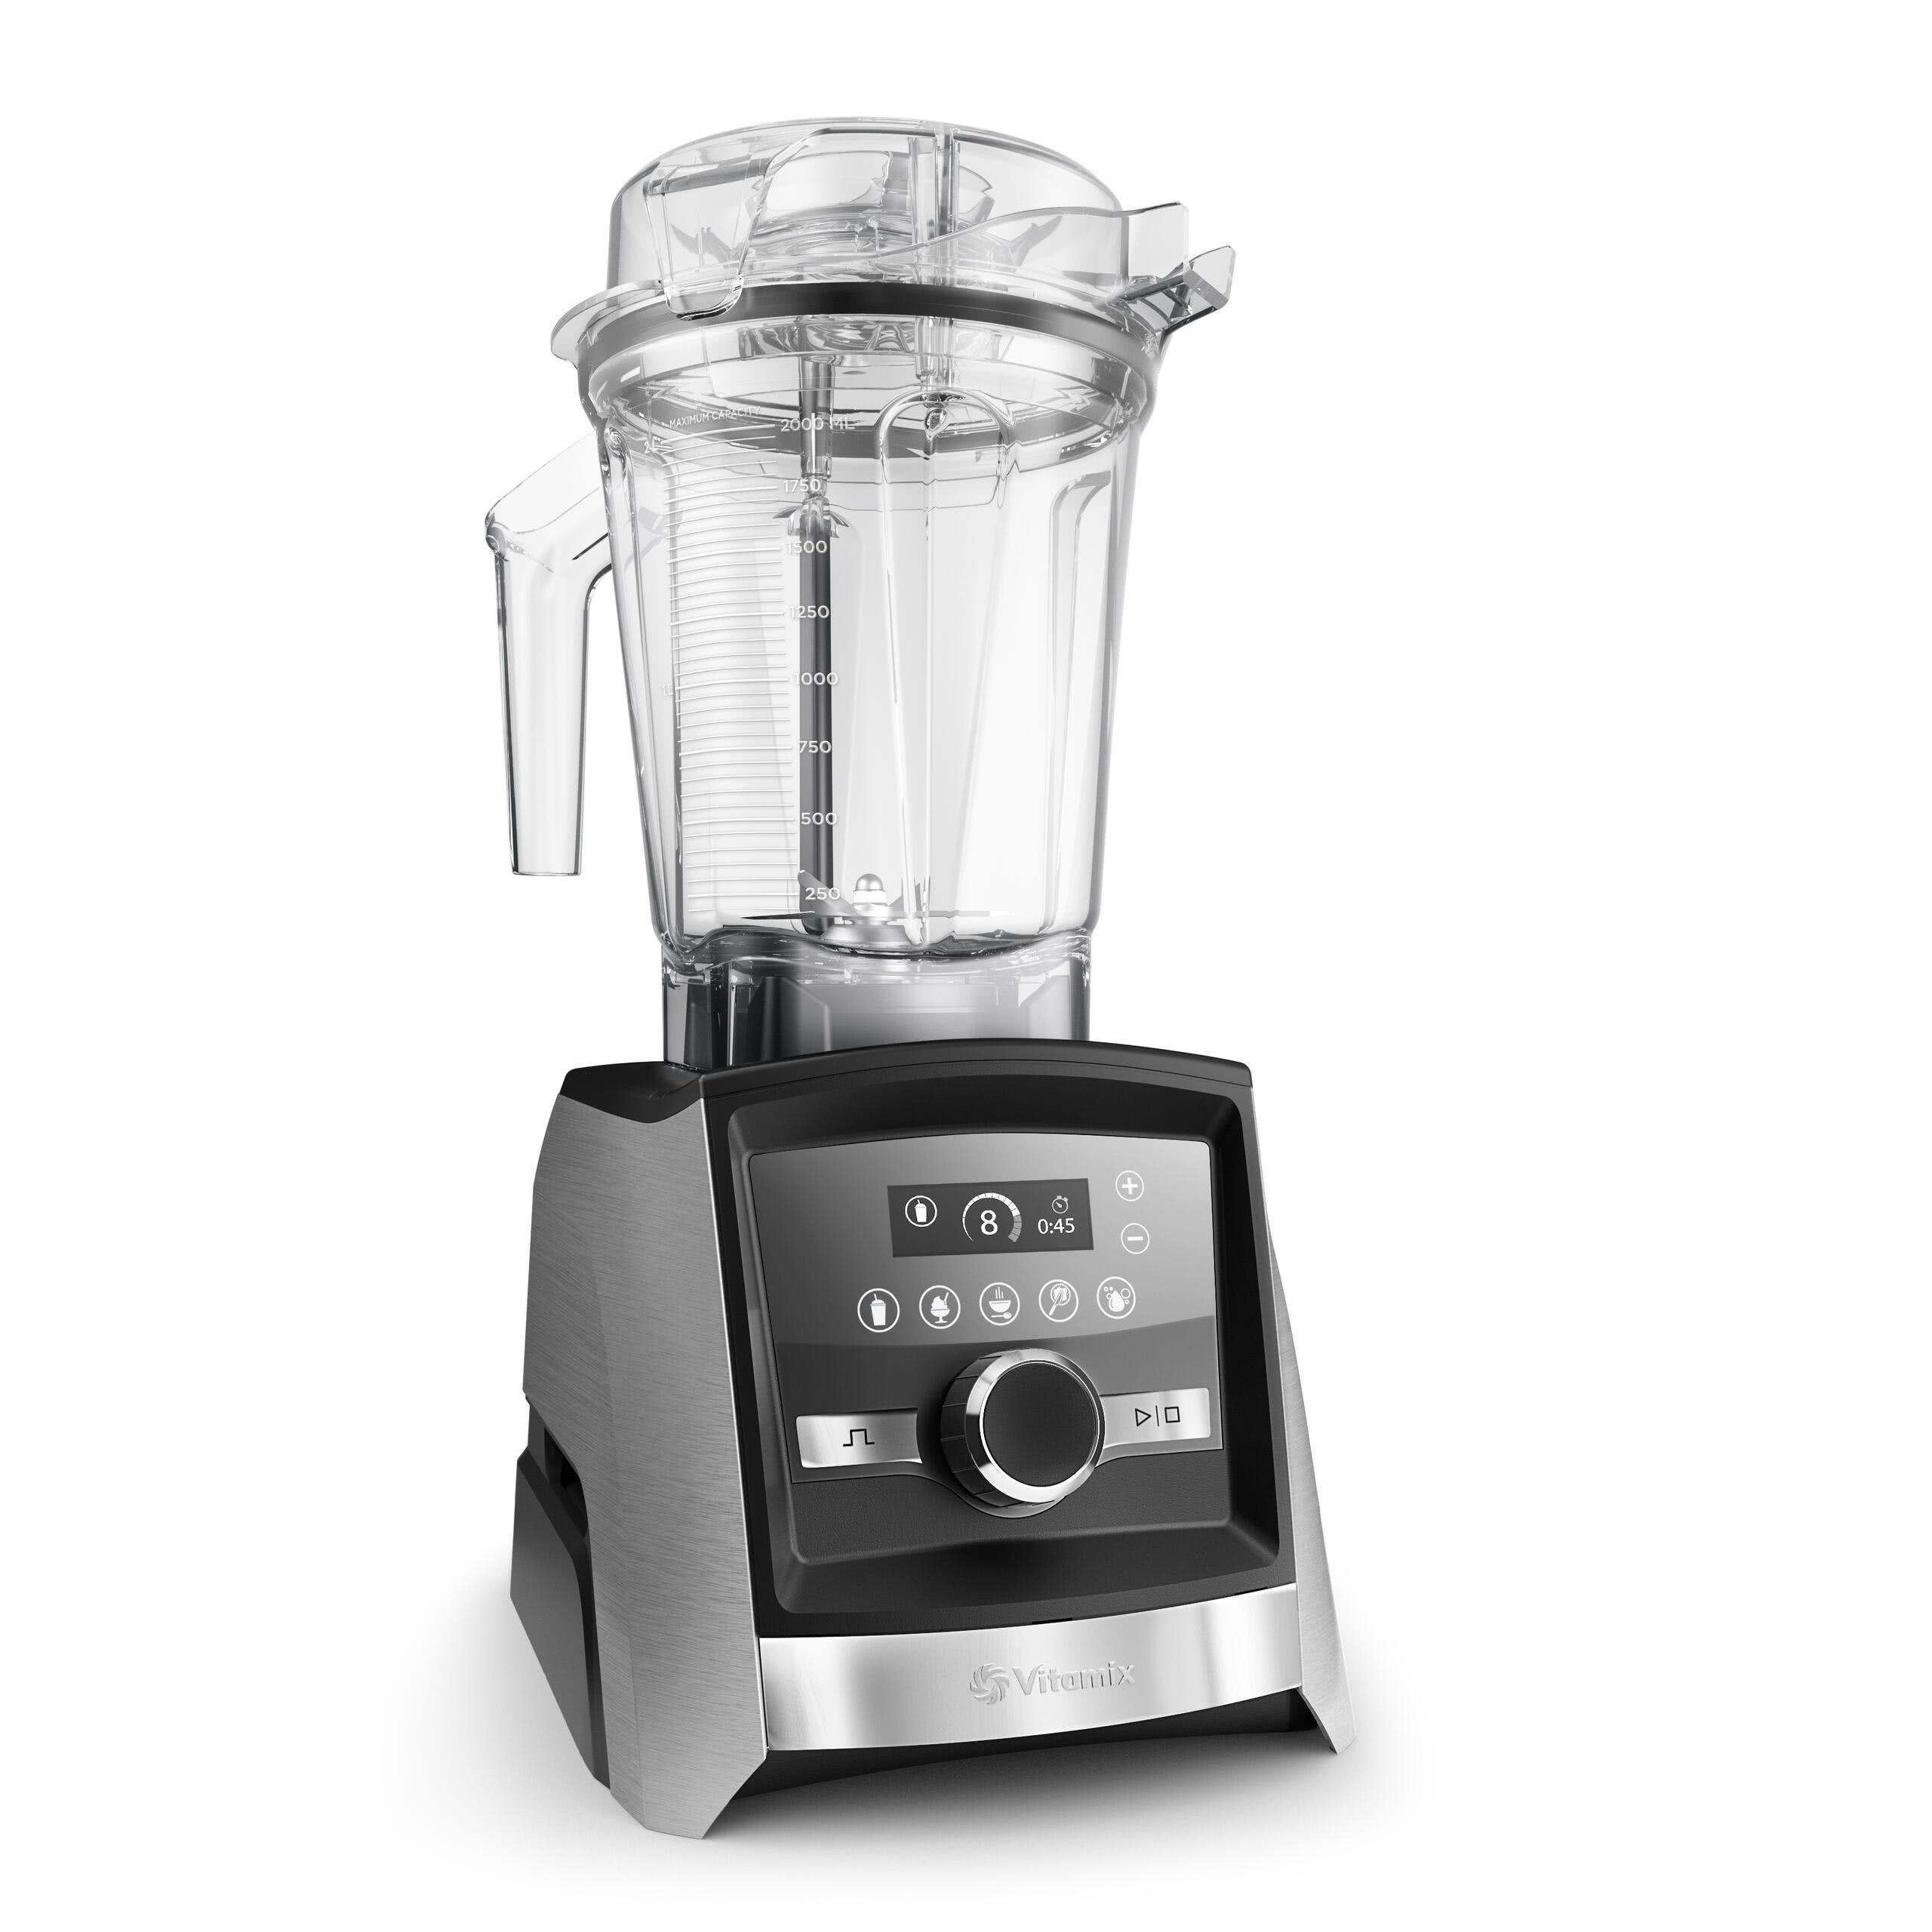 How the Vitamix Stainless Steel Container Became a Flex for